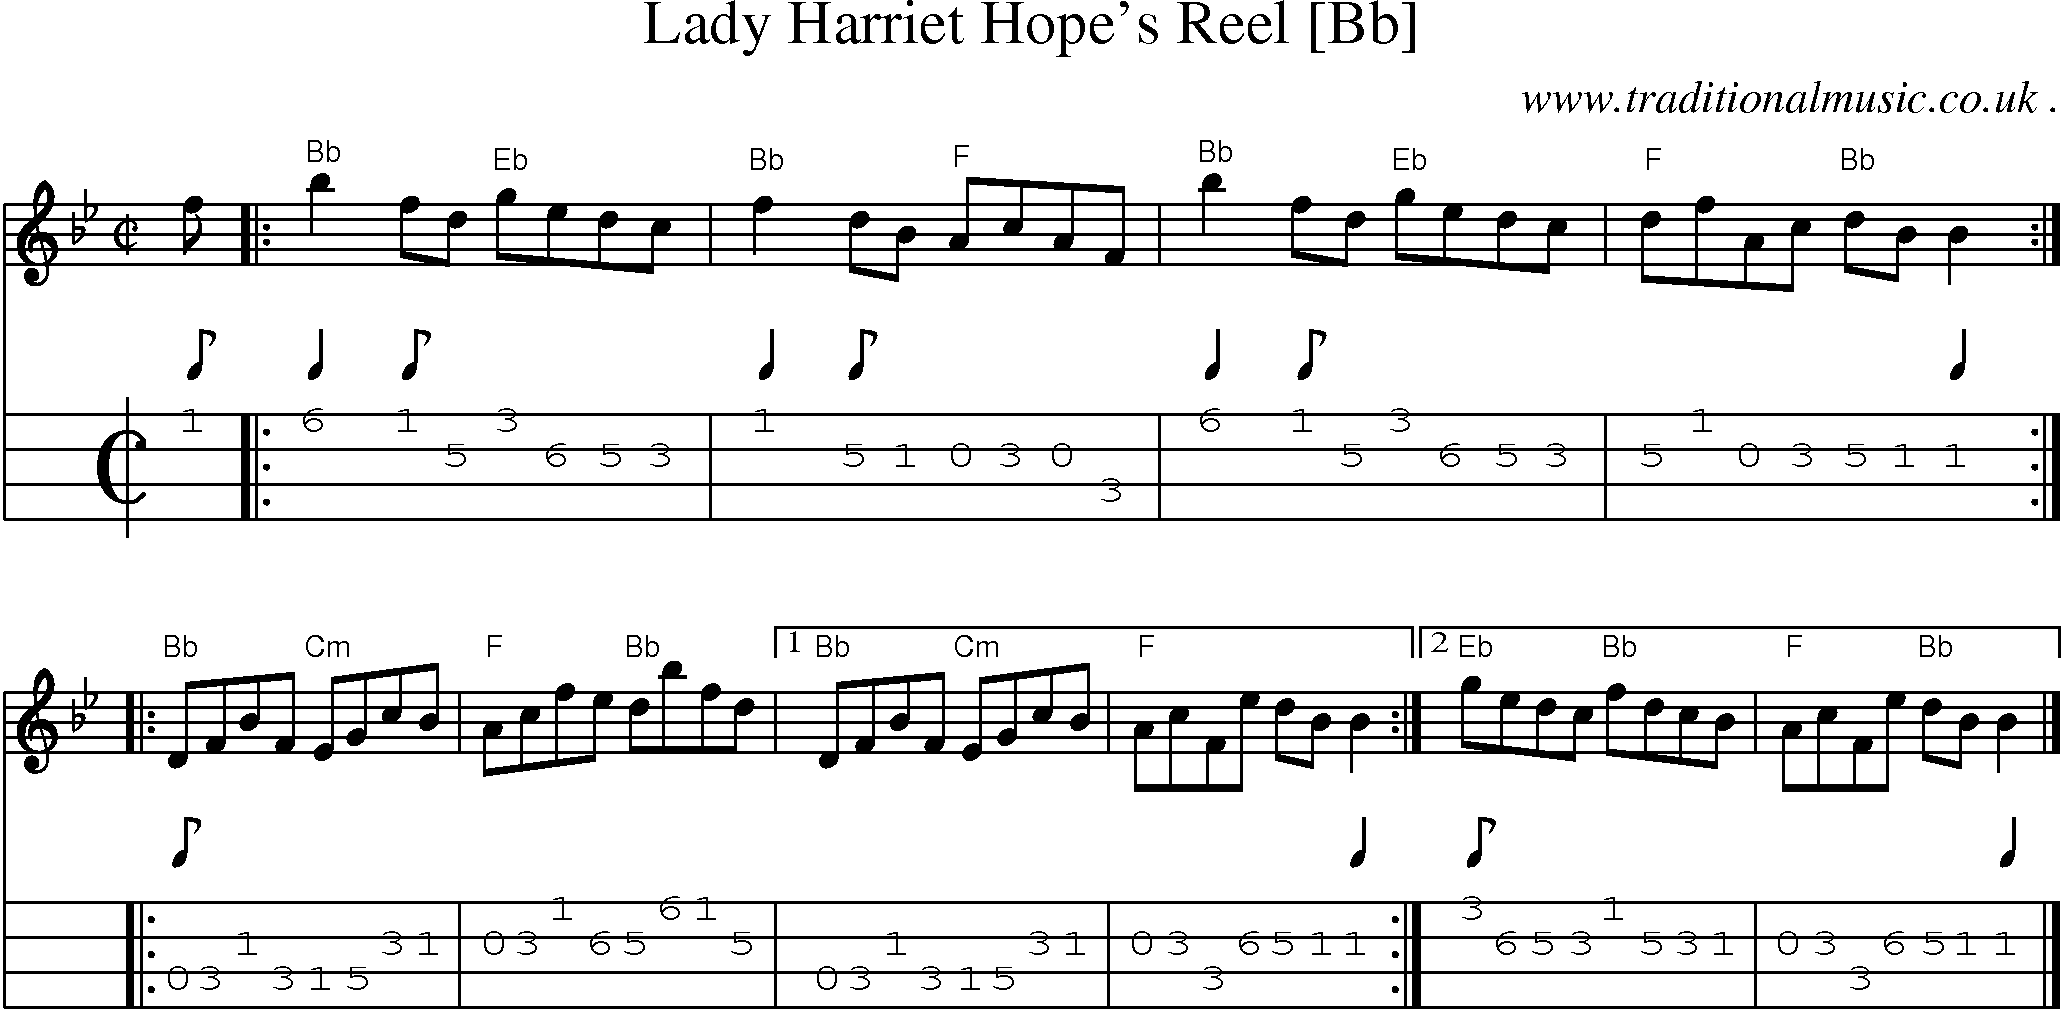 Sheet-music  score, Chords and Mandolin Tabs for Lady Harriet Hopes Reel [bb]